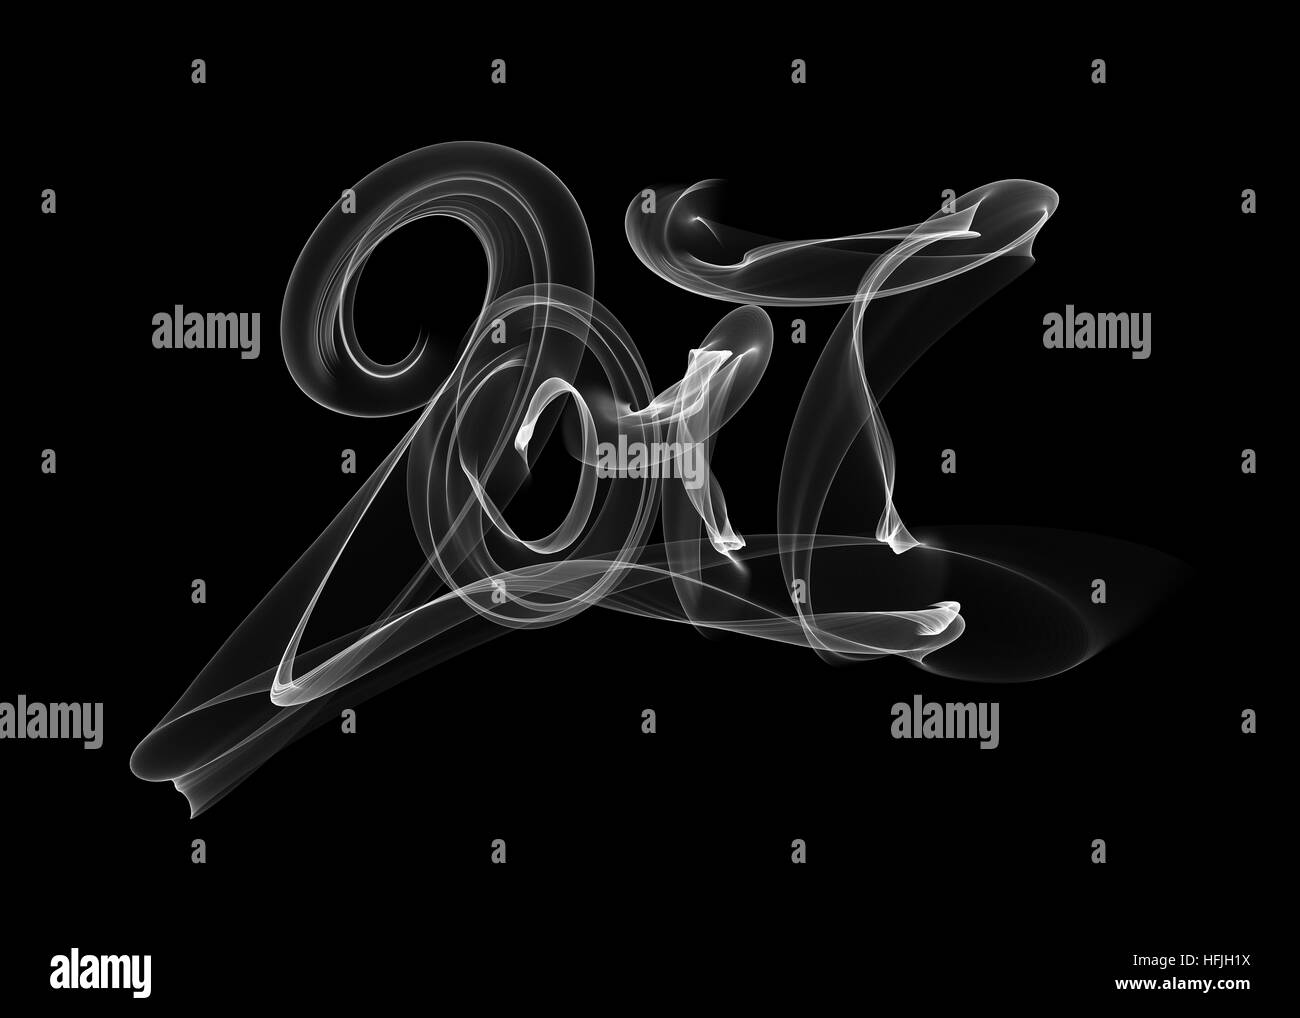 Happy new year 2017 isolated numbers lettering written with white fire flame or smoke on black background Stock Photo